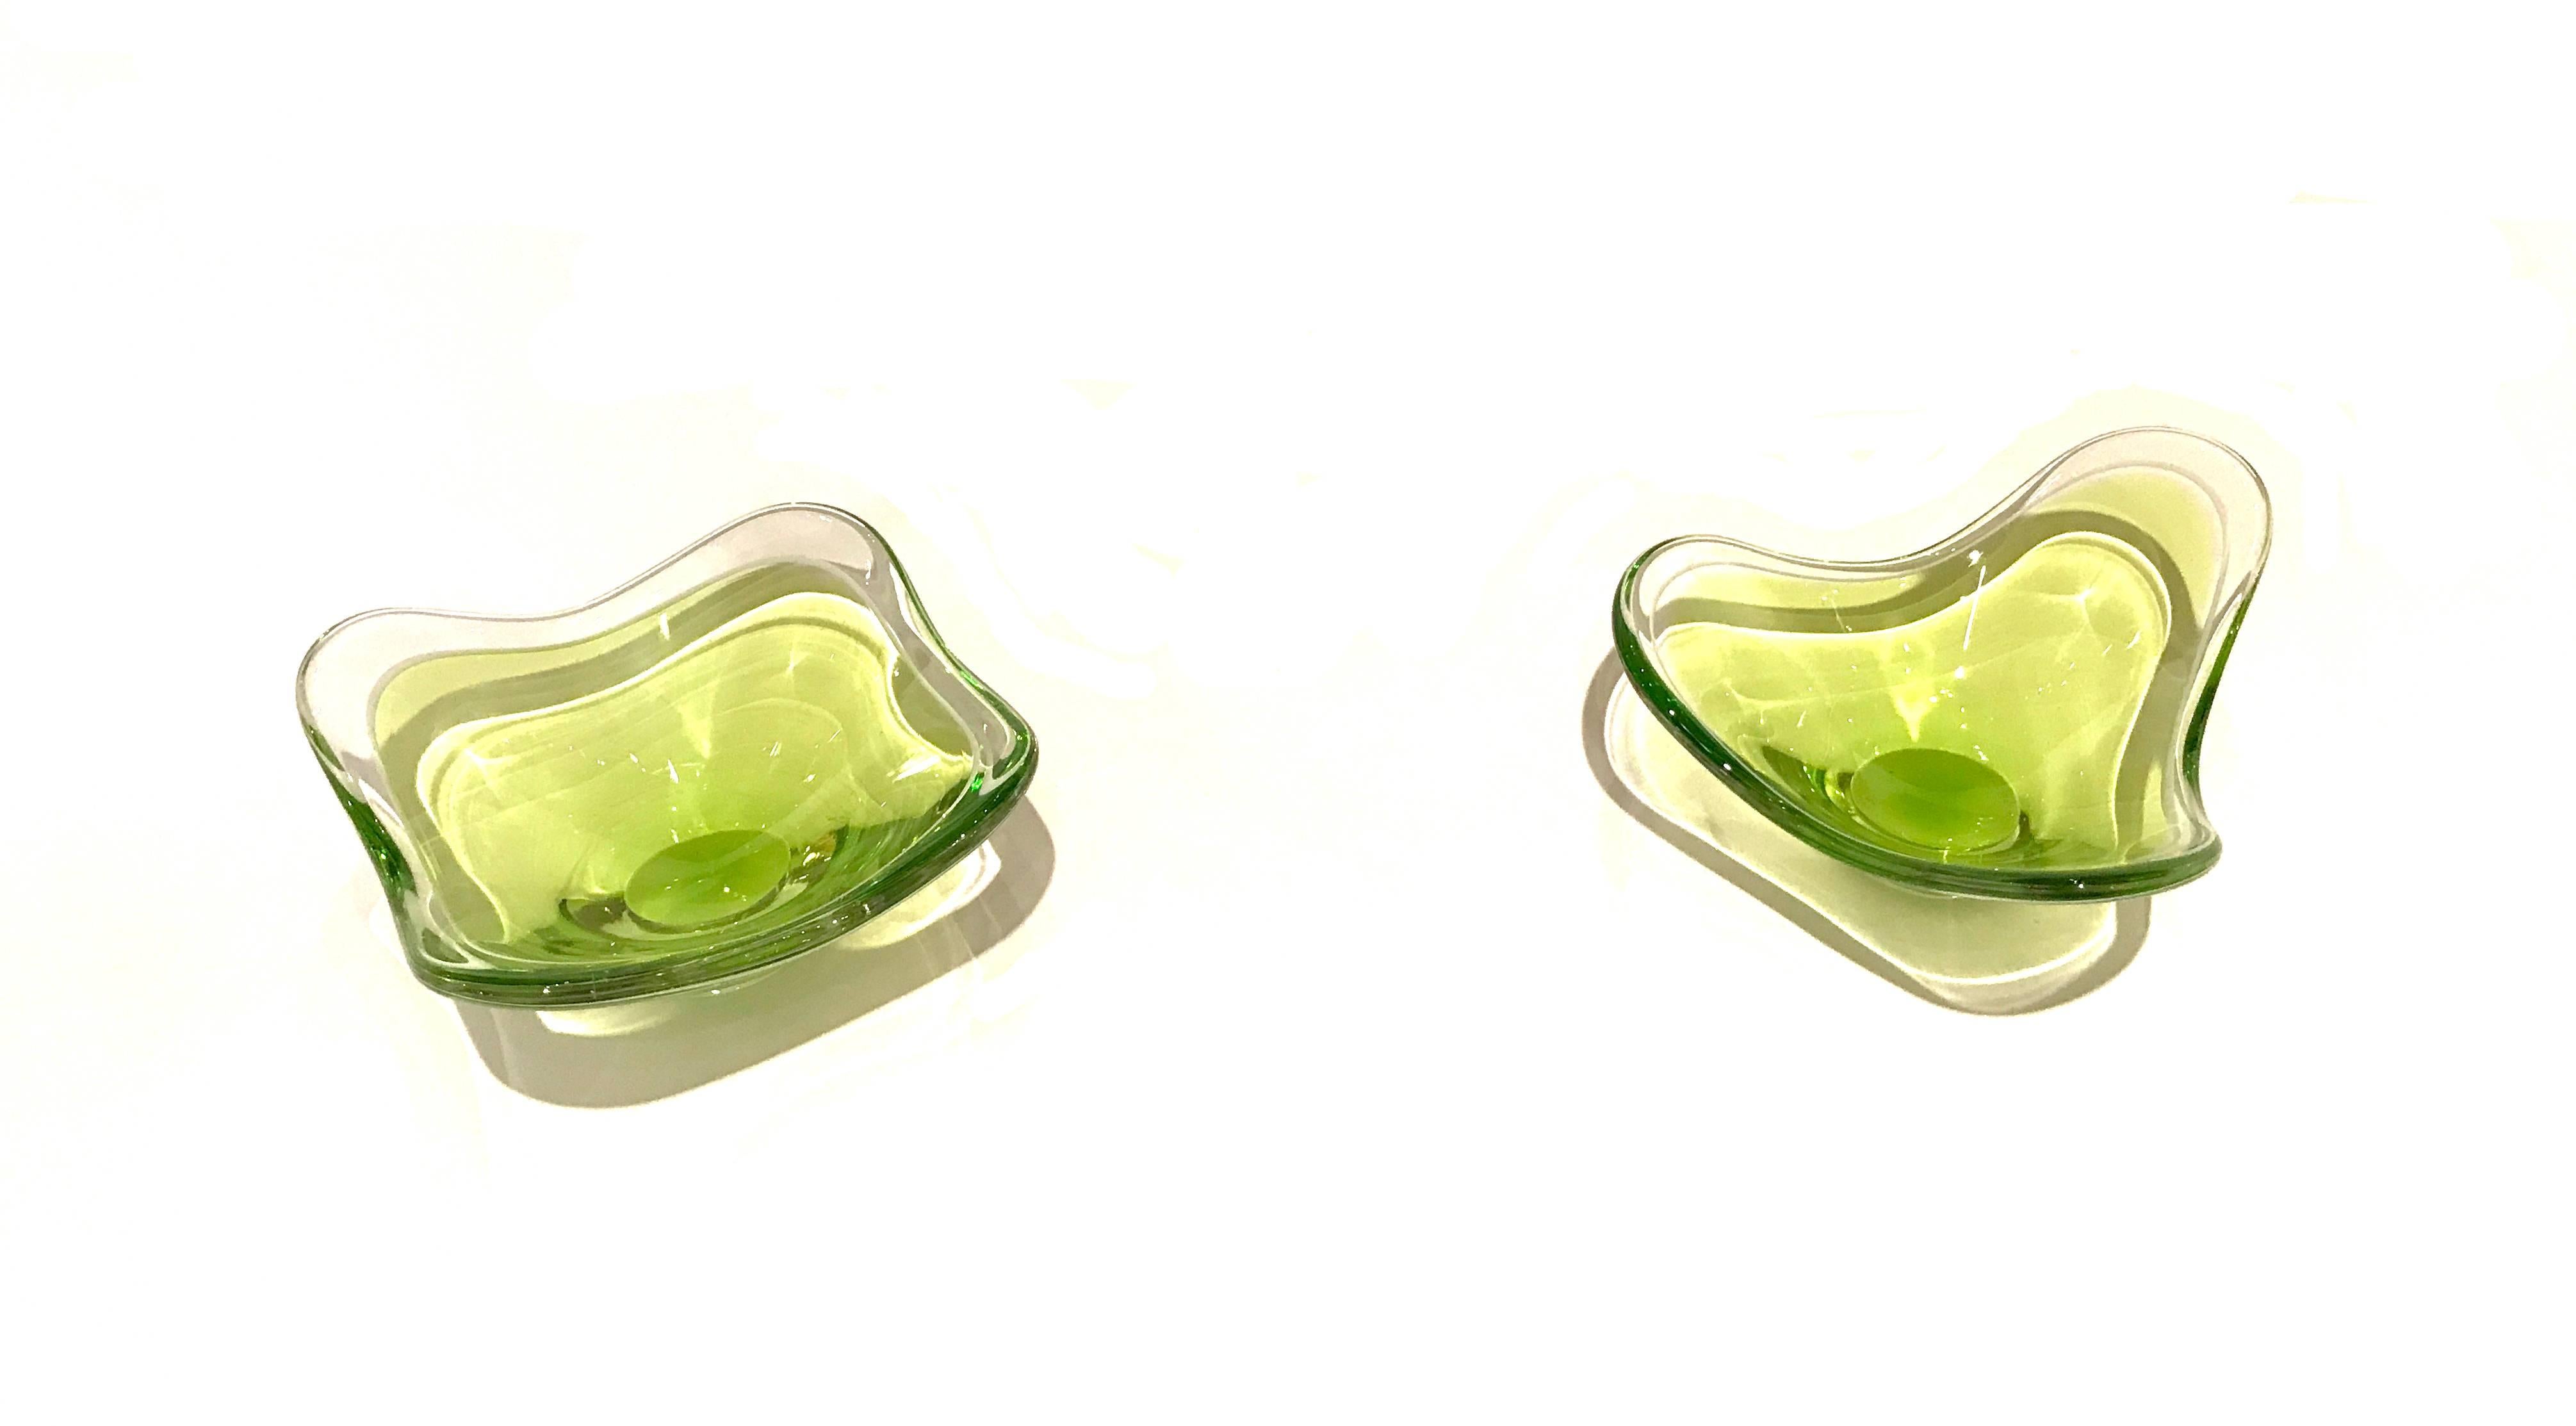 Scandinavian Modern Two Matching Glass Bowls by Paul Kedelv for Flygsfors, 1955 For Sale